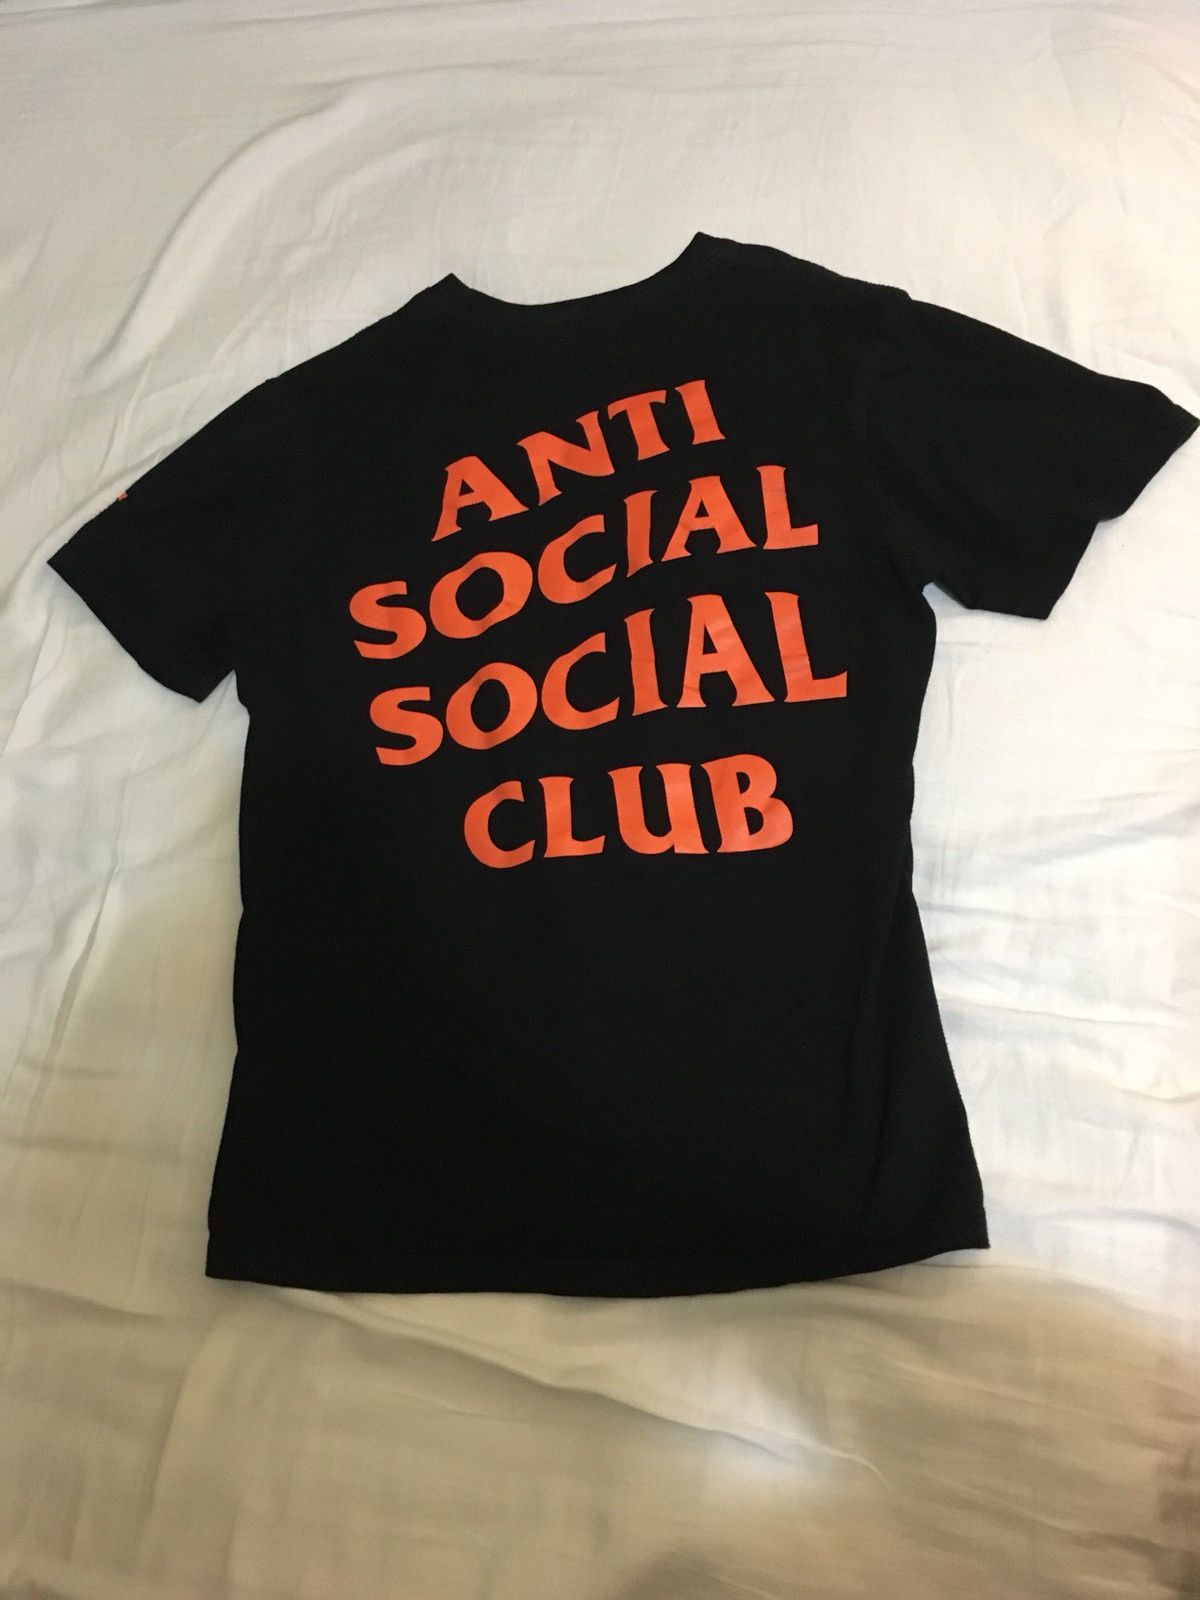 Undefeated Assc X Undefeated Paranoid Tee | Grailed